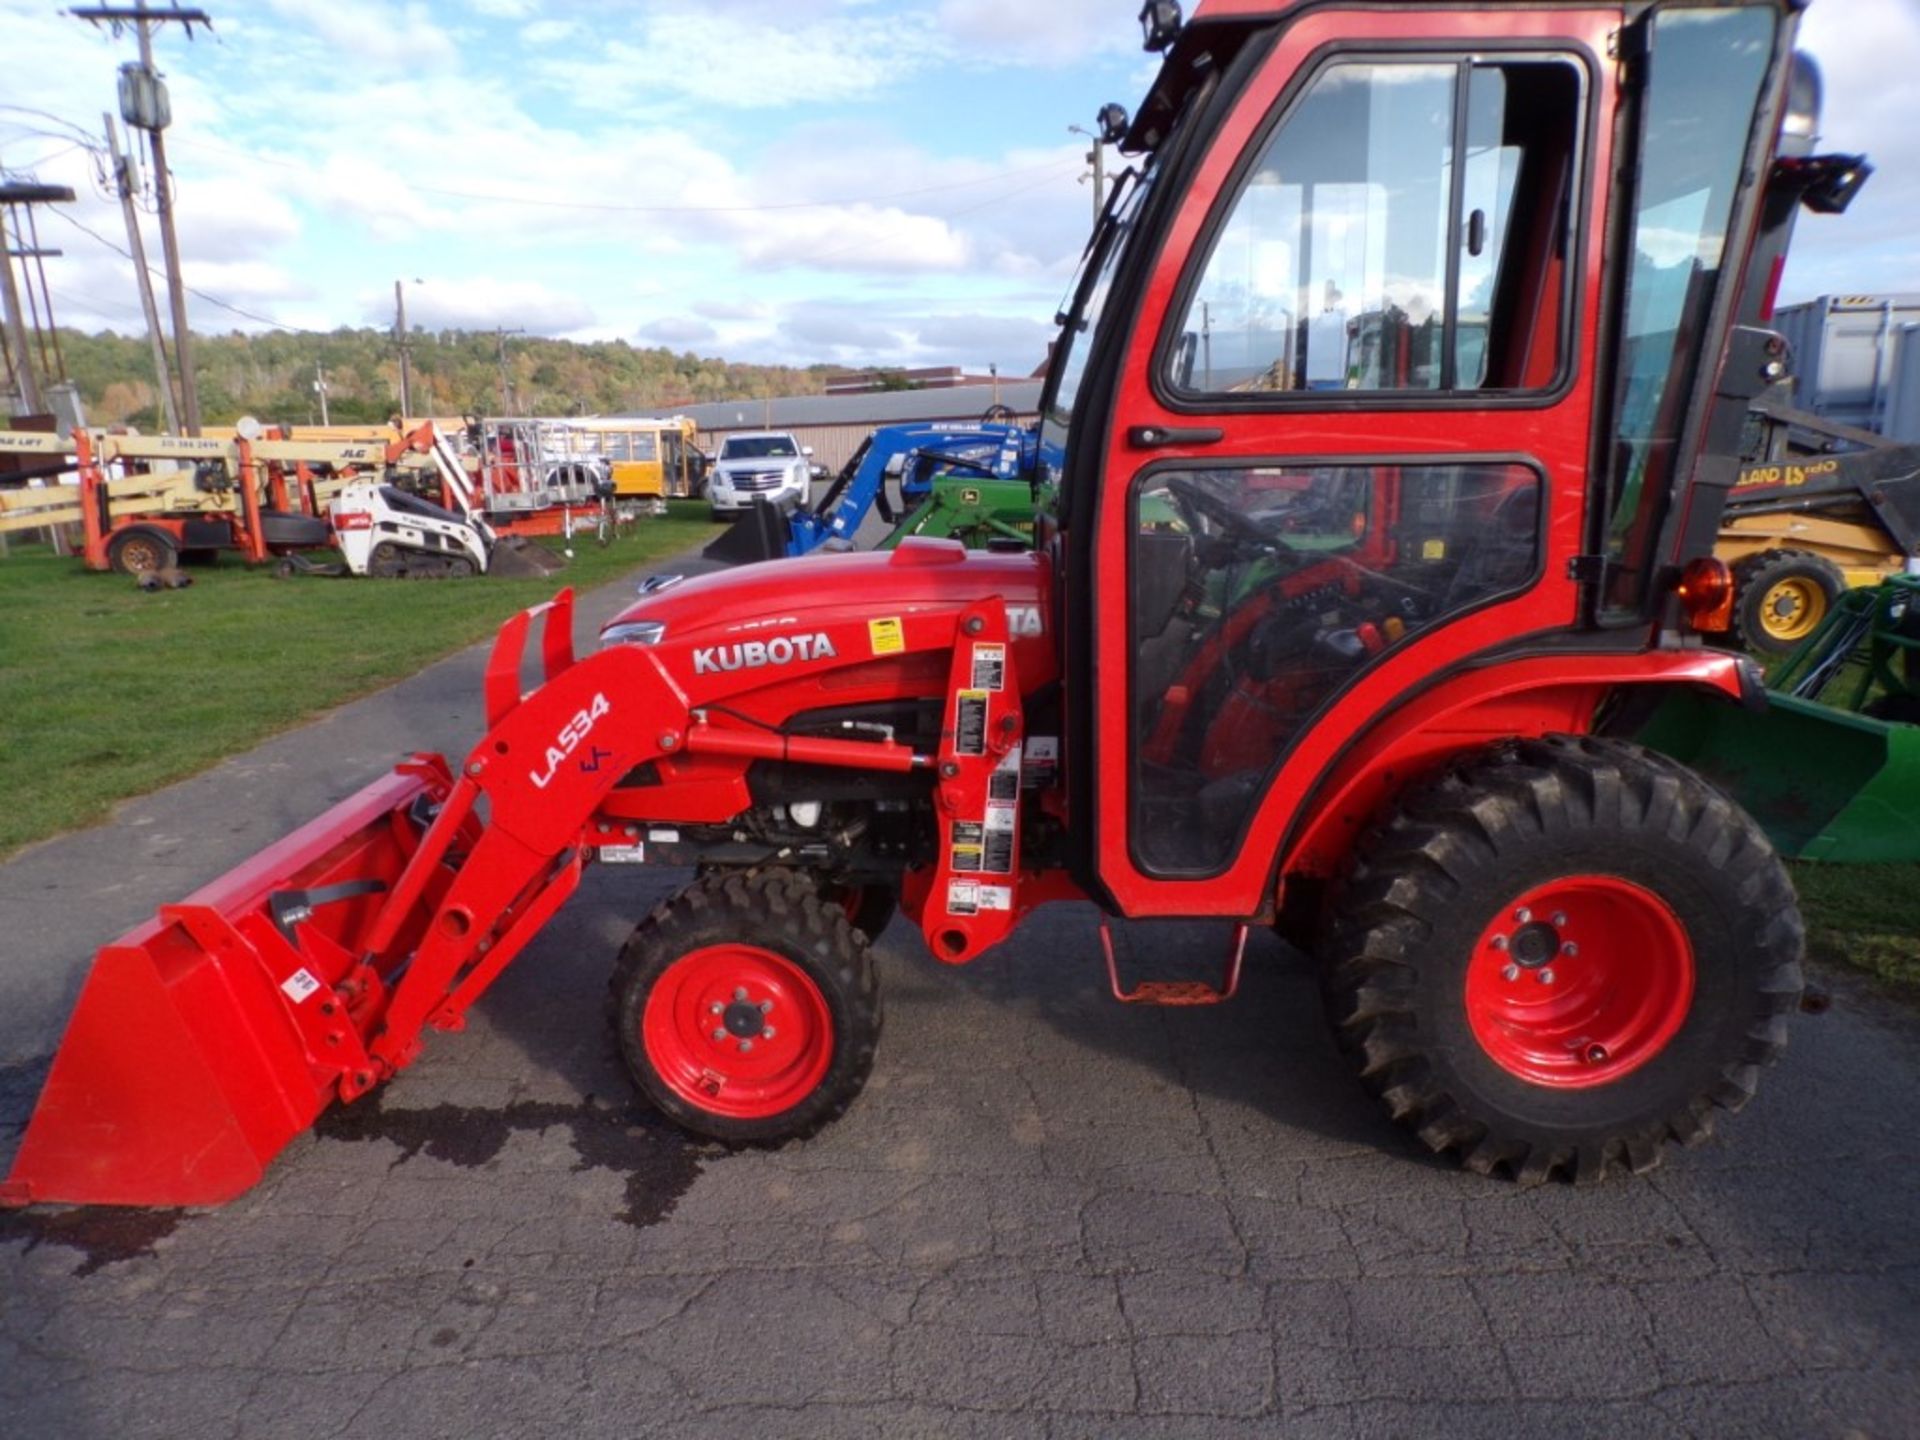 Kubota B3350 4WD Compact Tractor w/Loader and Sims Hard Door Cab, R4 Tires, 1002 Hrs, S/N -